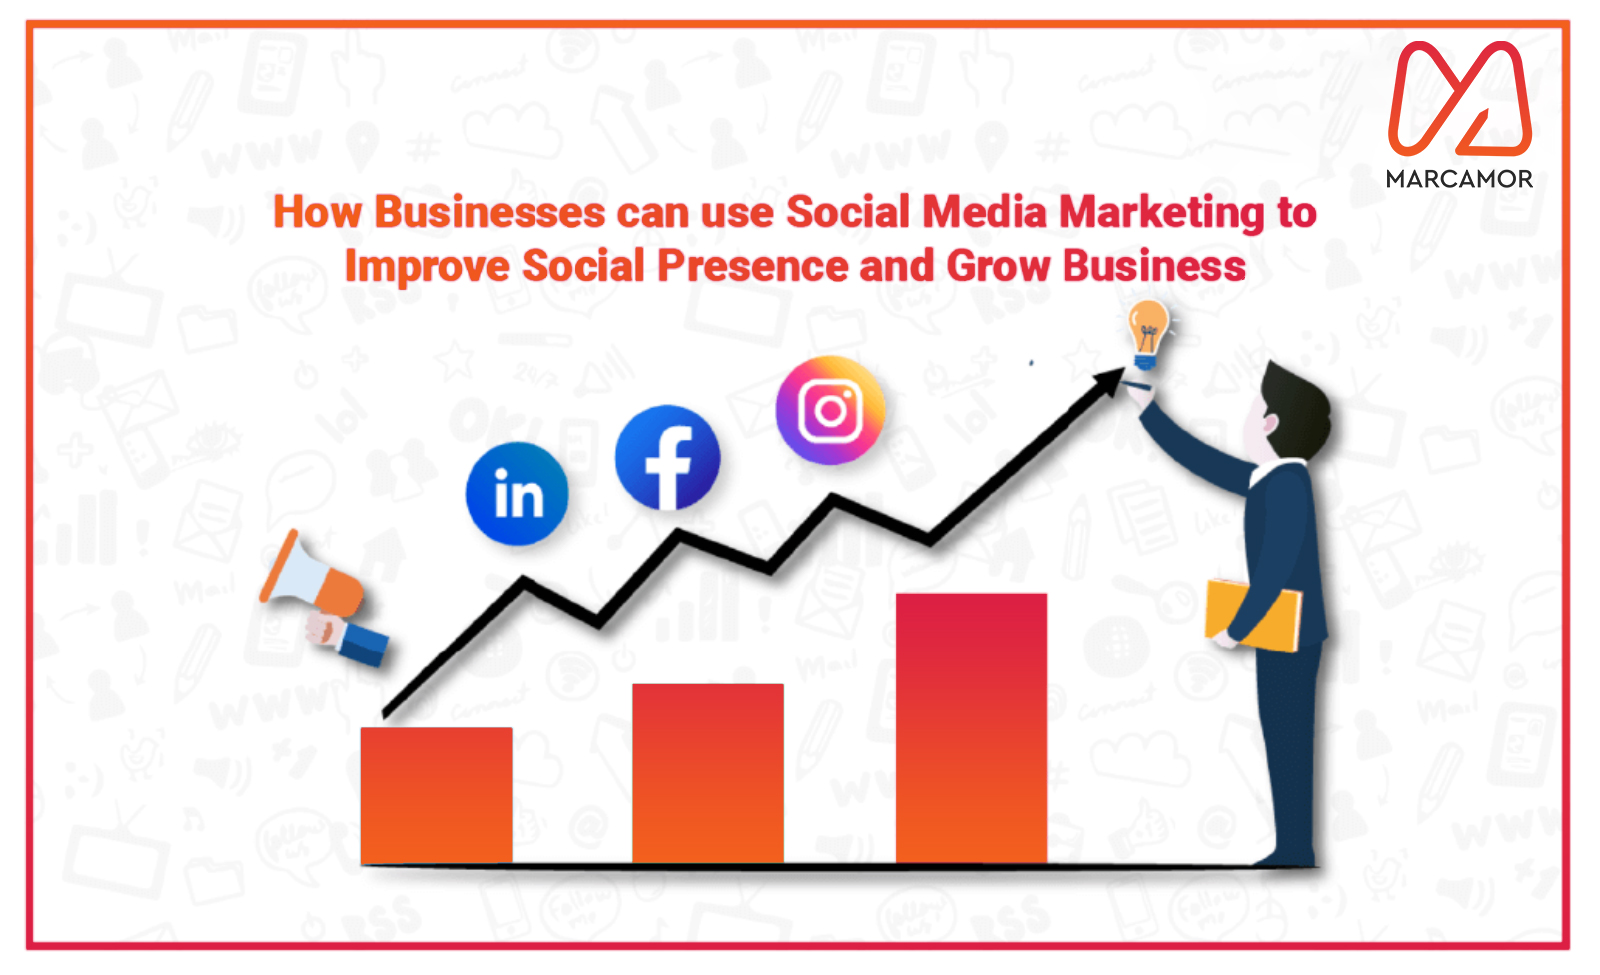 Social Media Marketing-Ways to Upscale Business Growth and Social Media Presence